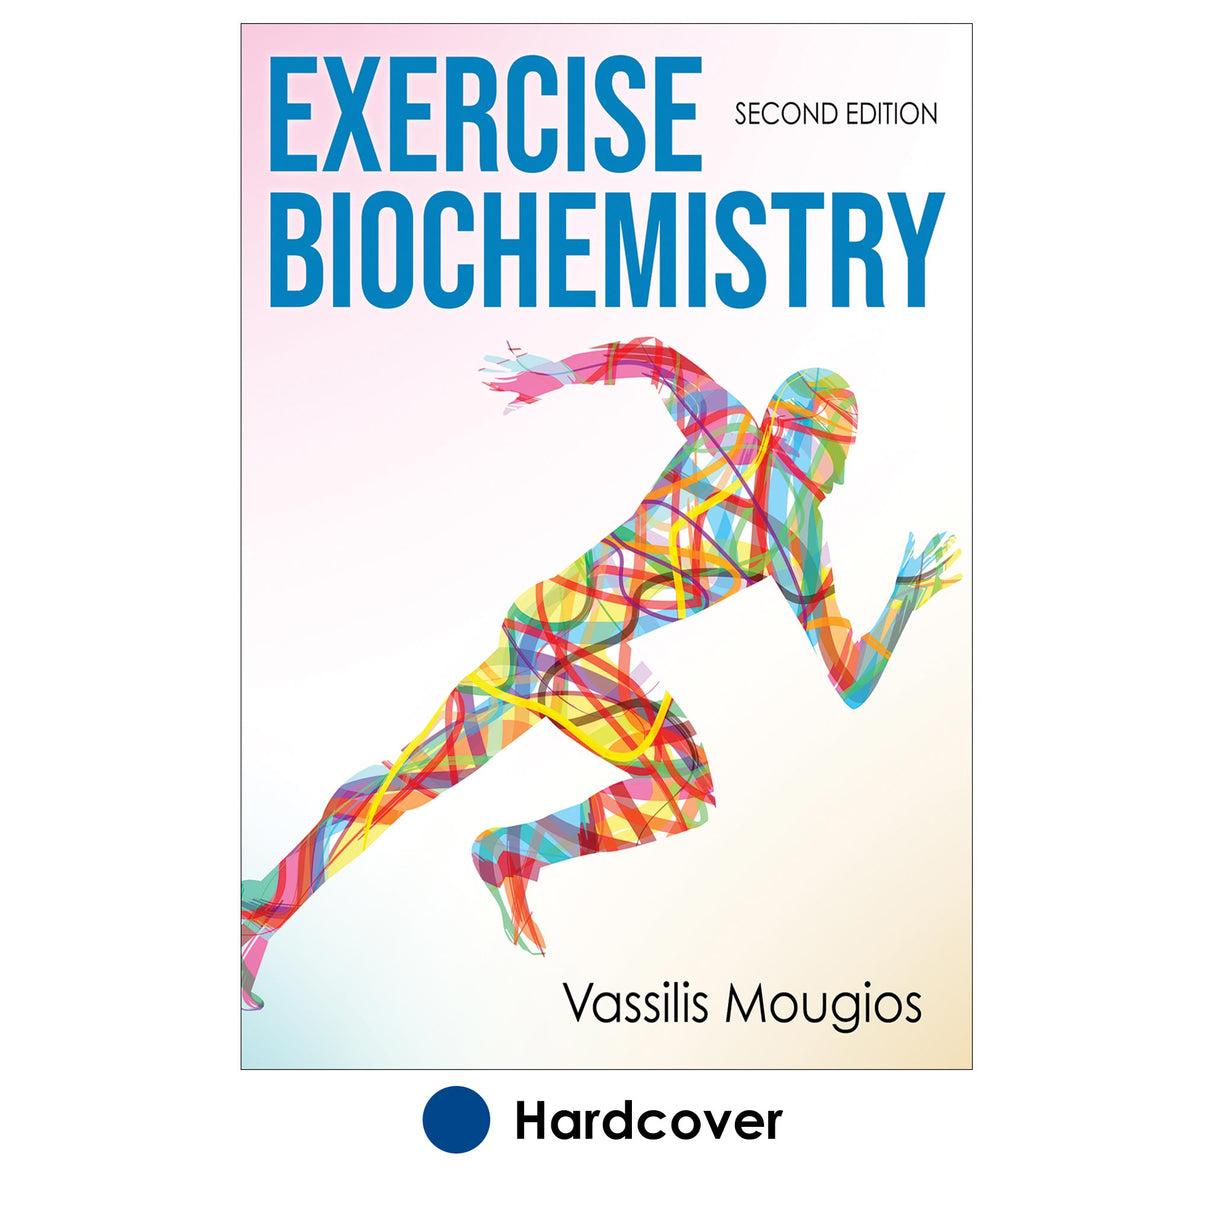 Exercise Biochemistry 2nd Edition